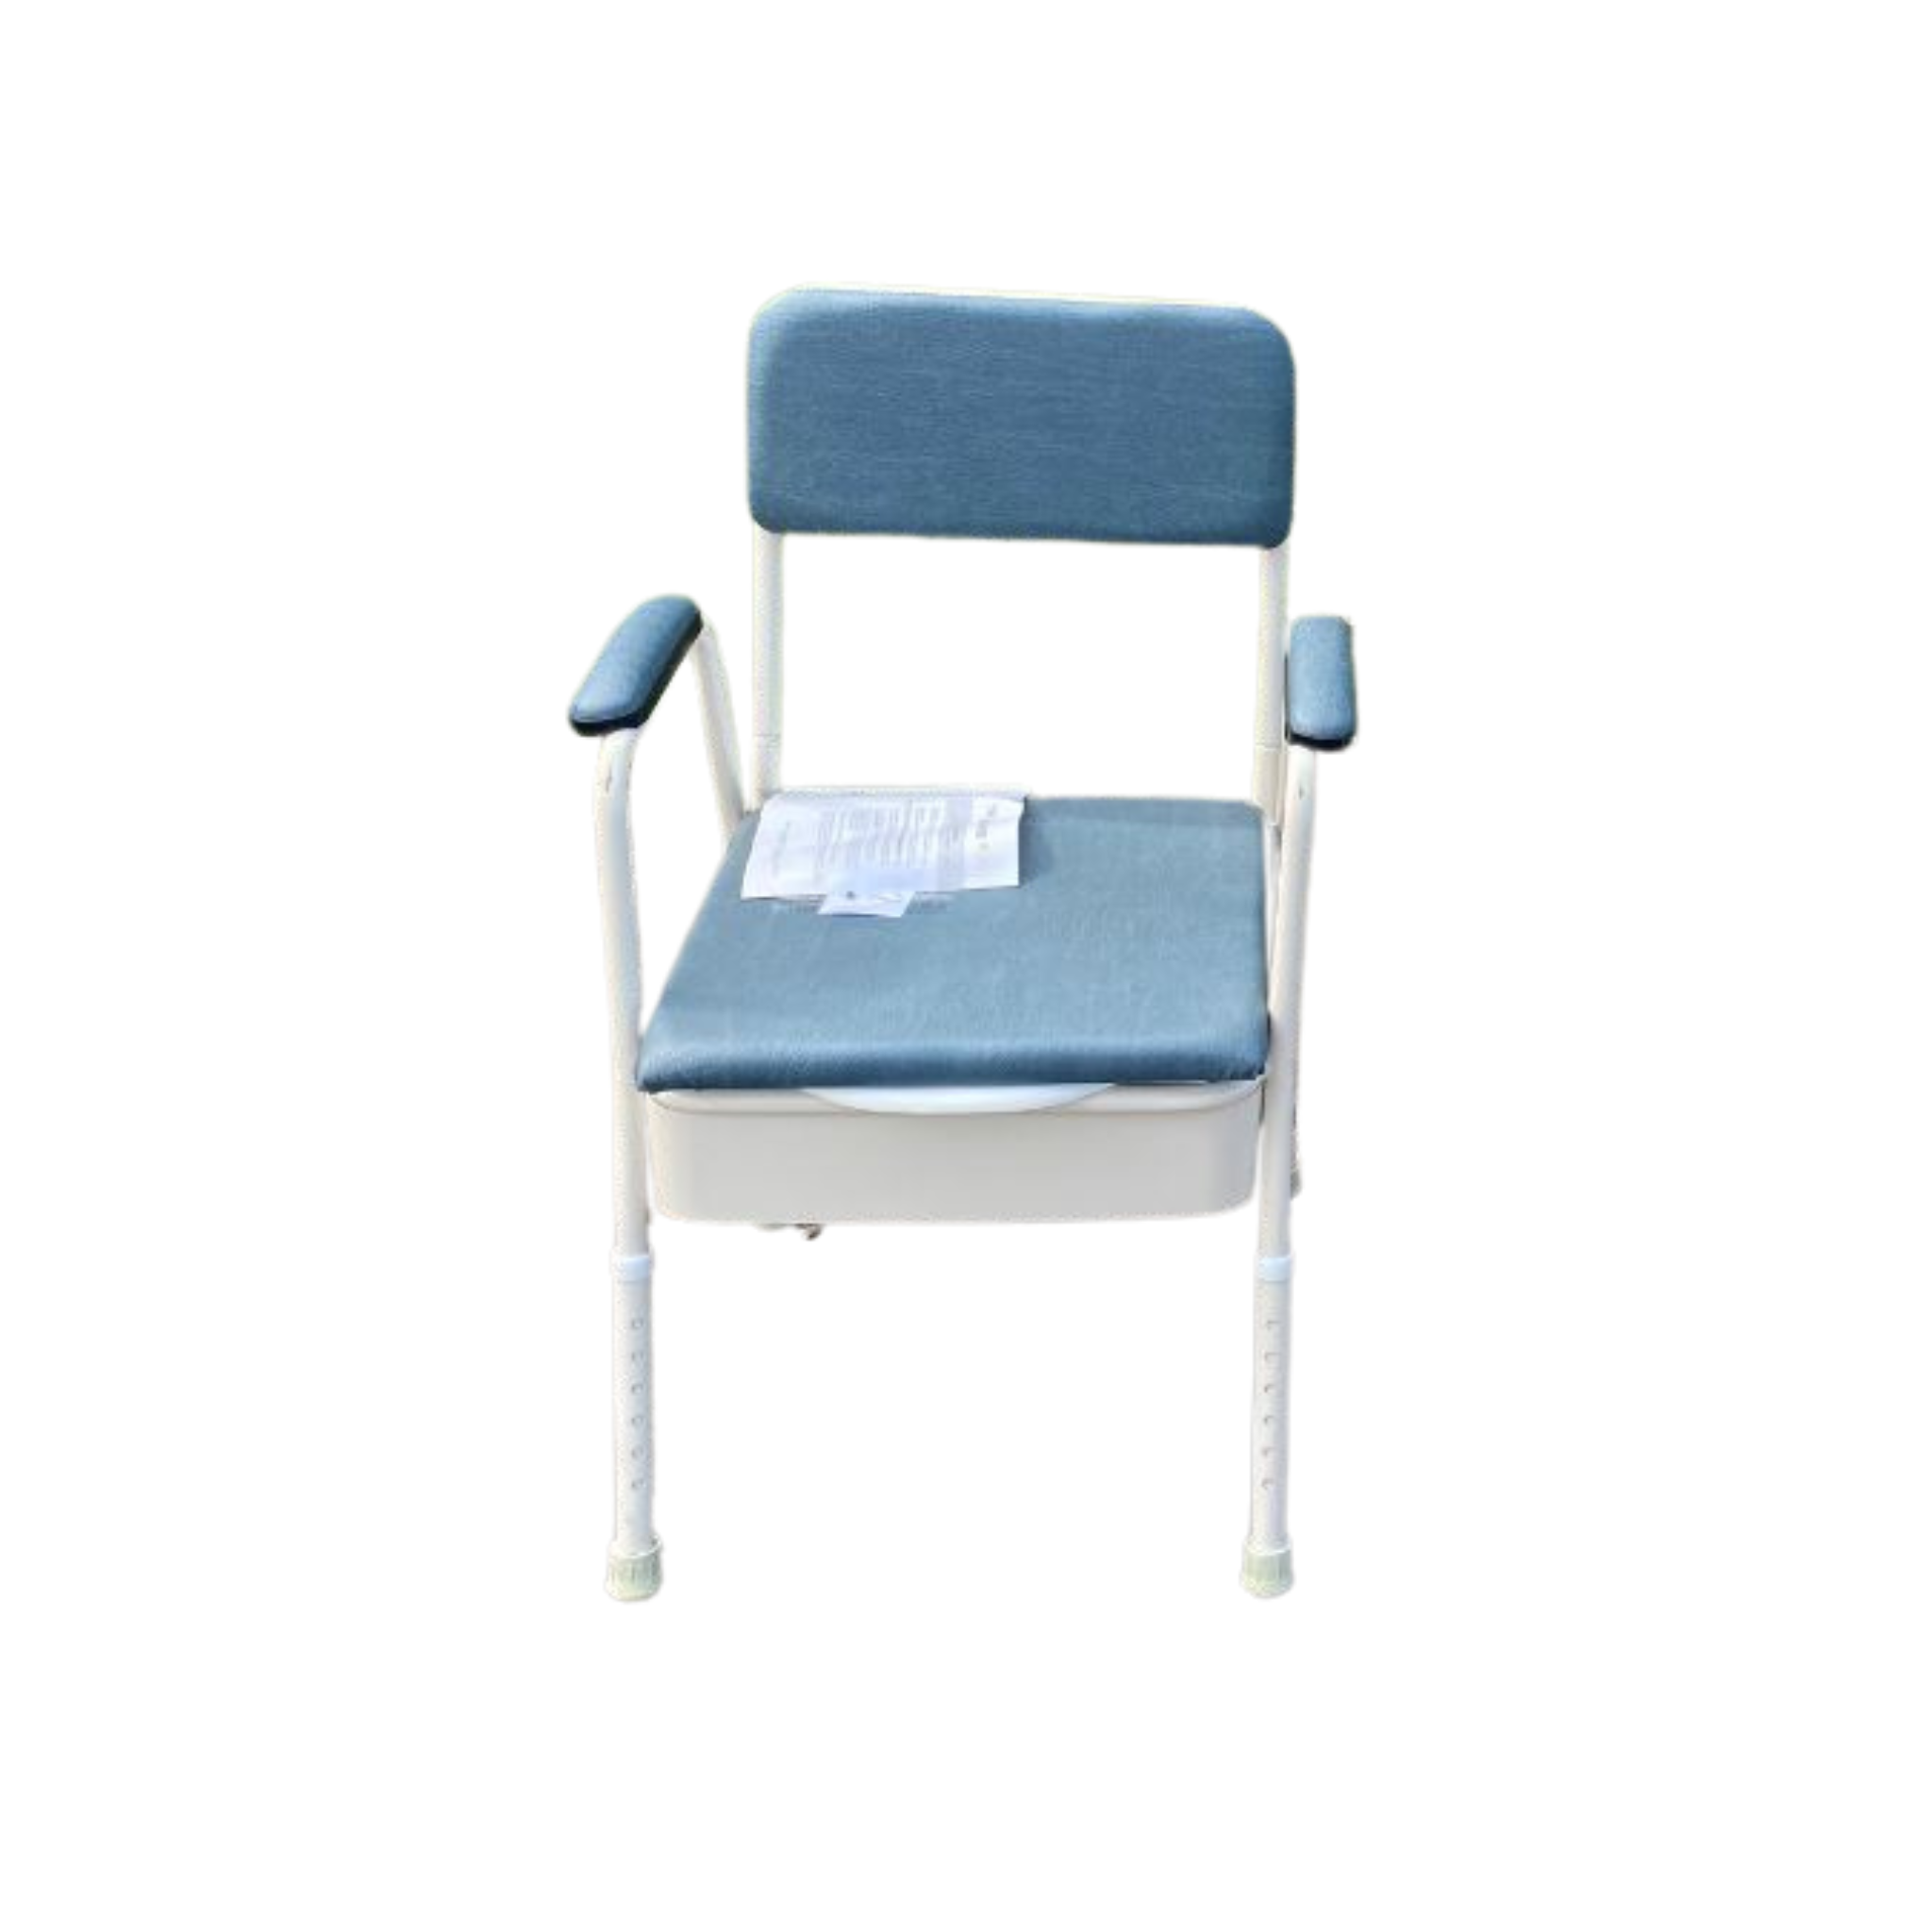 Rental - Deluxe Bedside Commode, Blue from Aged Care and Medical - Commode for Hire for Aged Care